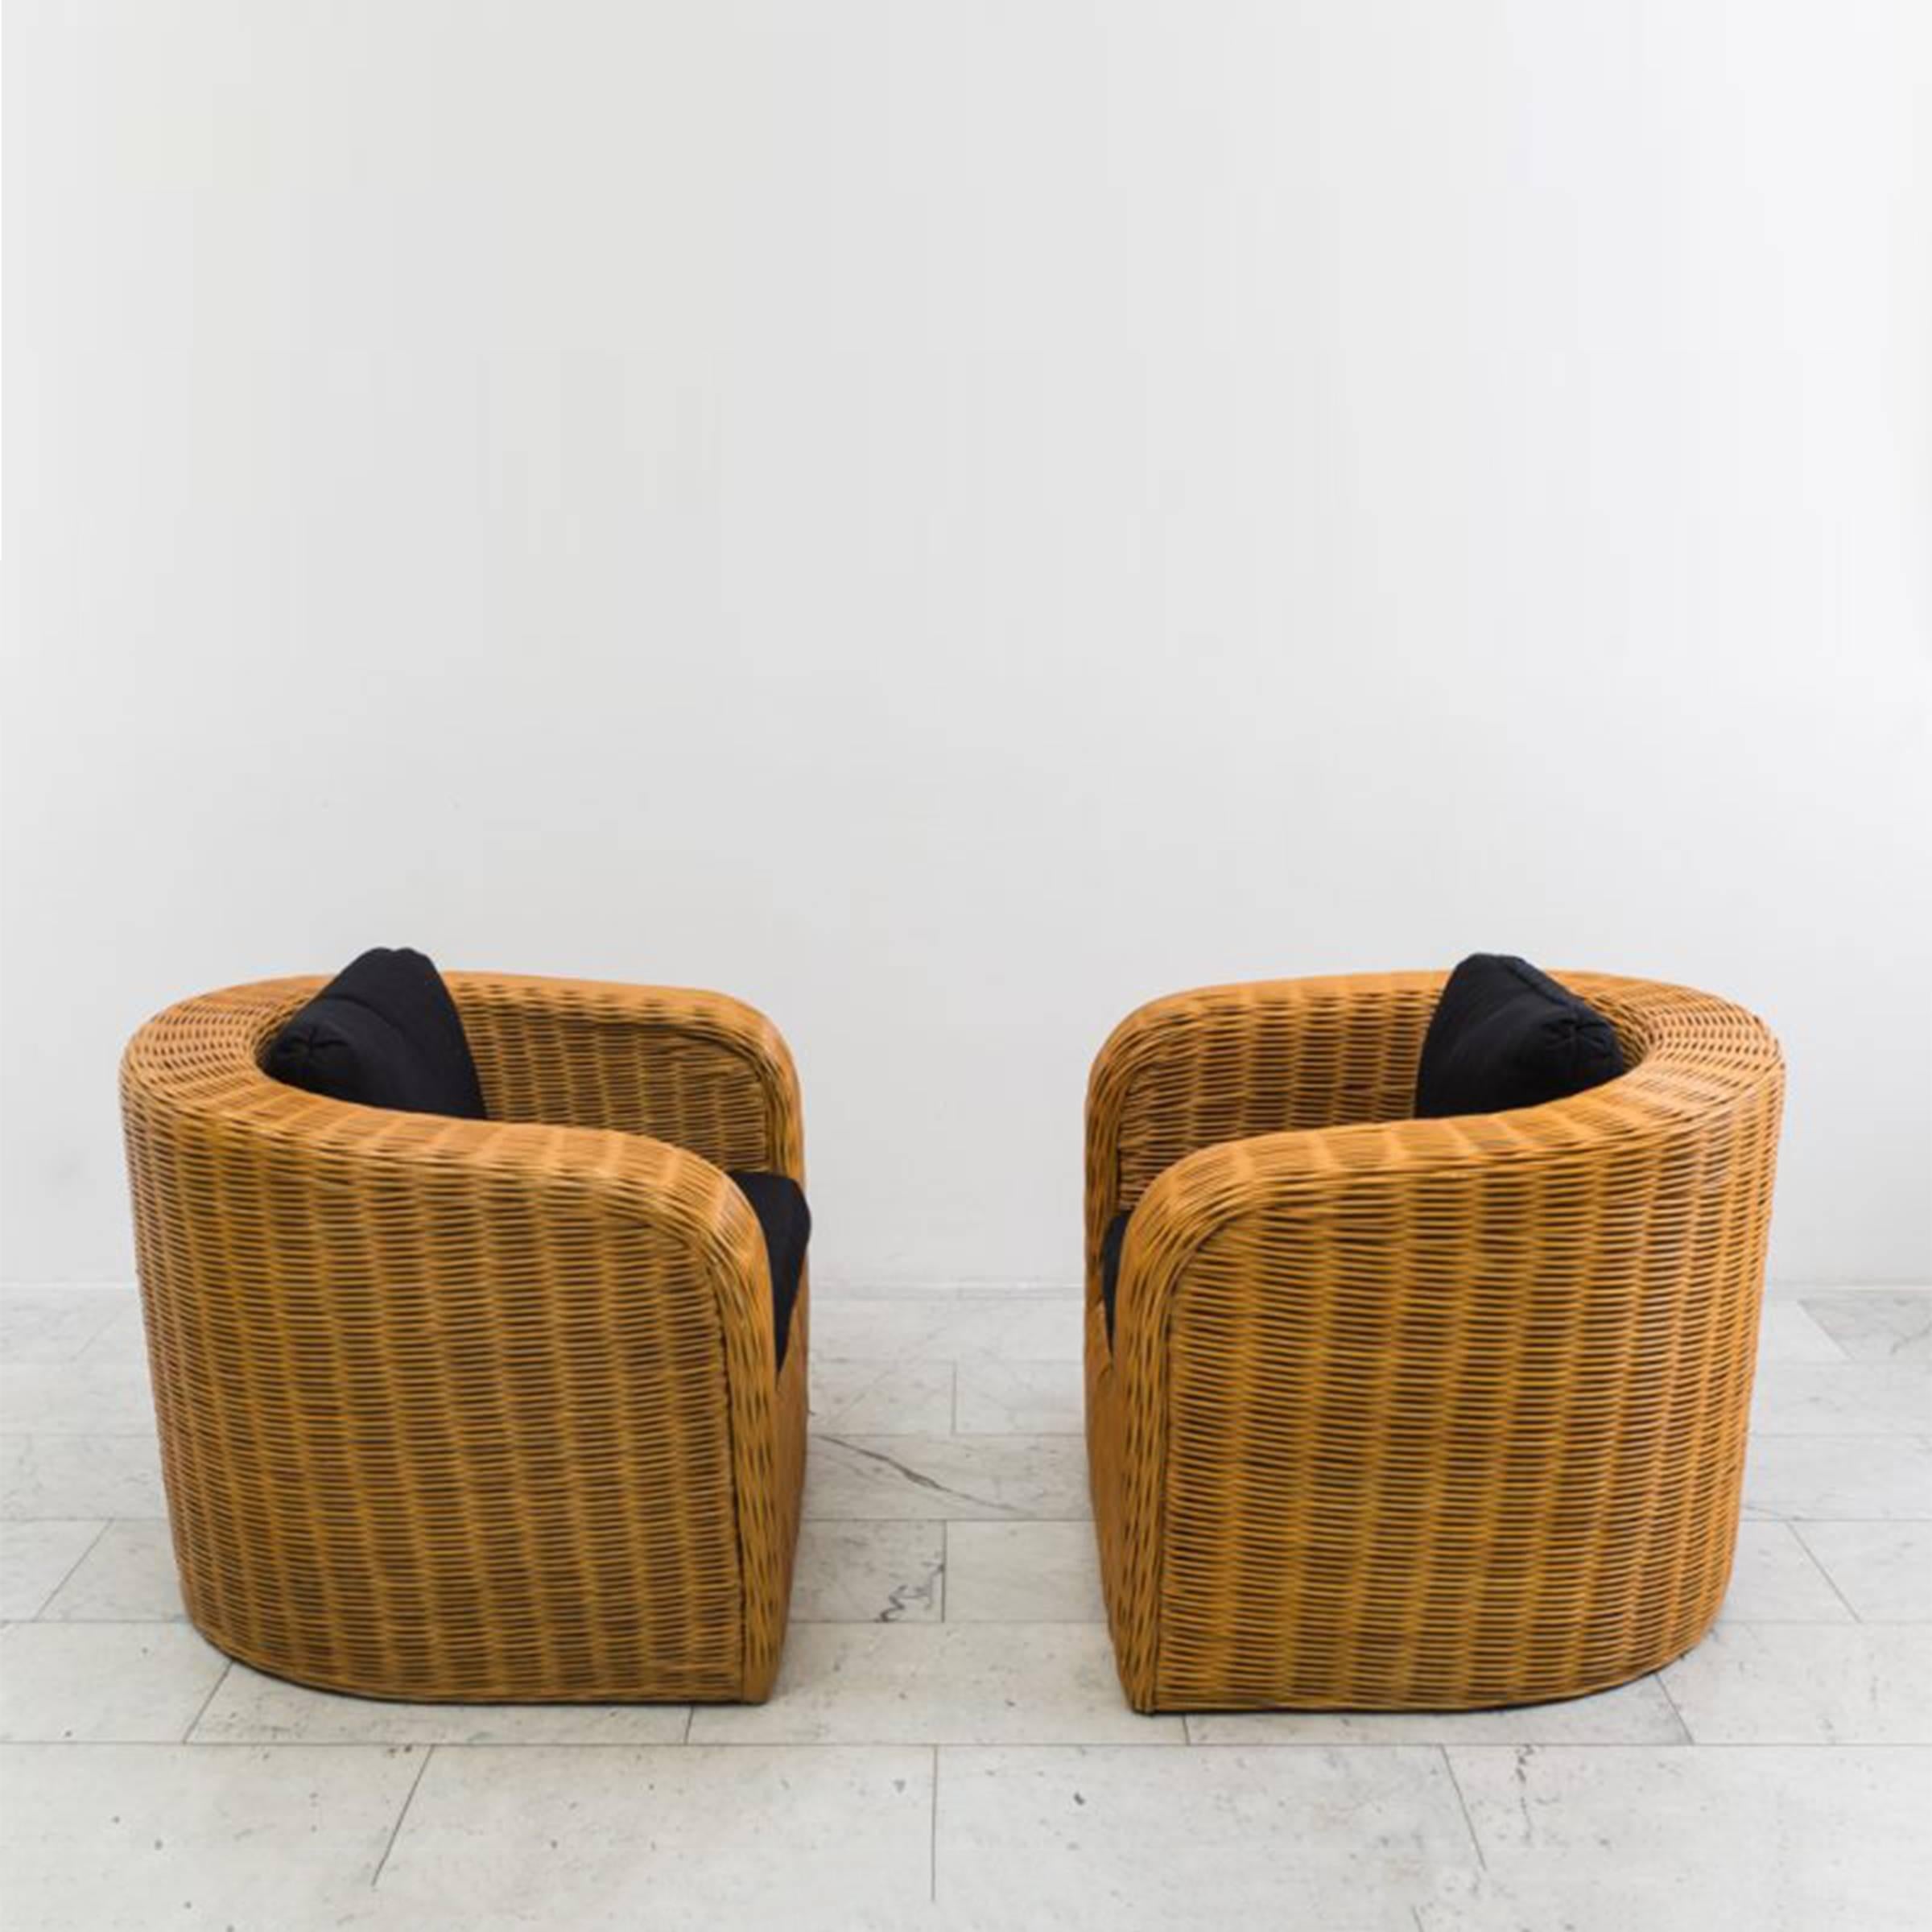 These gorgeous rounded-back Karl Springer Pullman Chairs were designed in 1985.  Constructed of bamboo and wicker the chairs feature Springer’s penchant for simple, elegant lines, excellent craftsmanship and a modern aesthetic. A matching Pullman